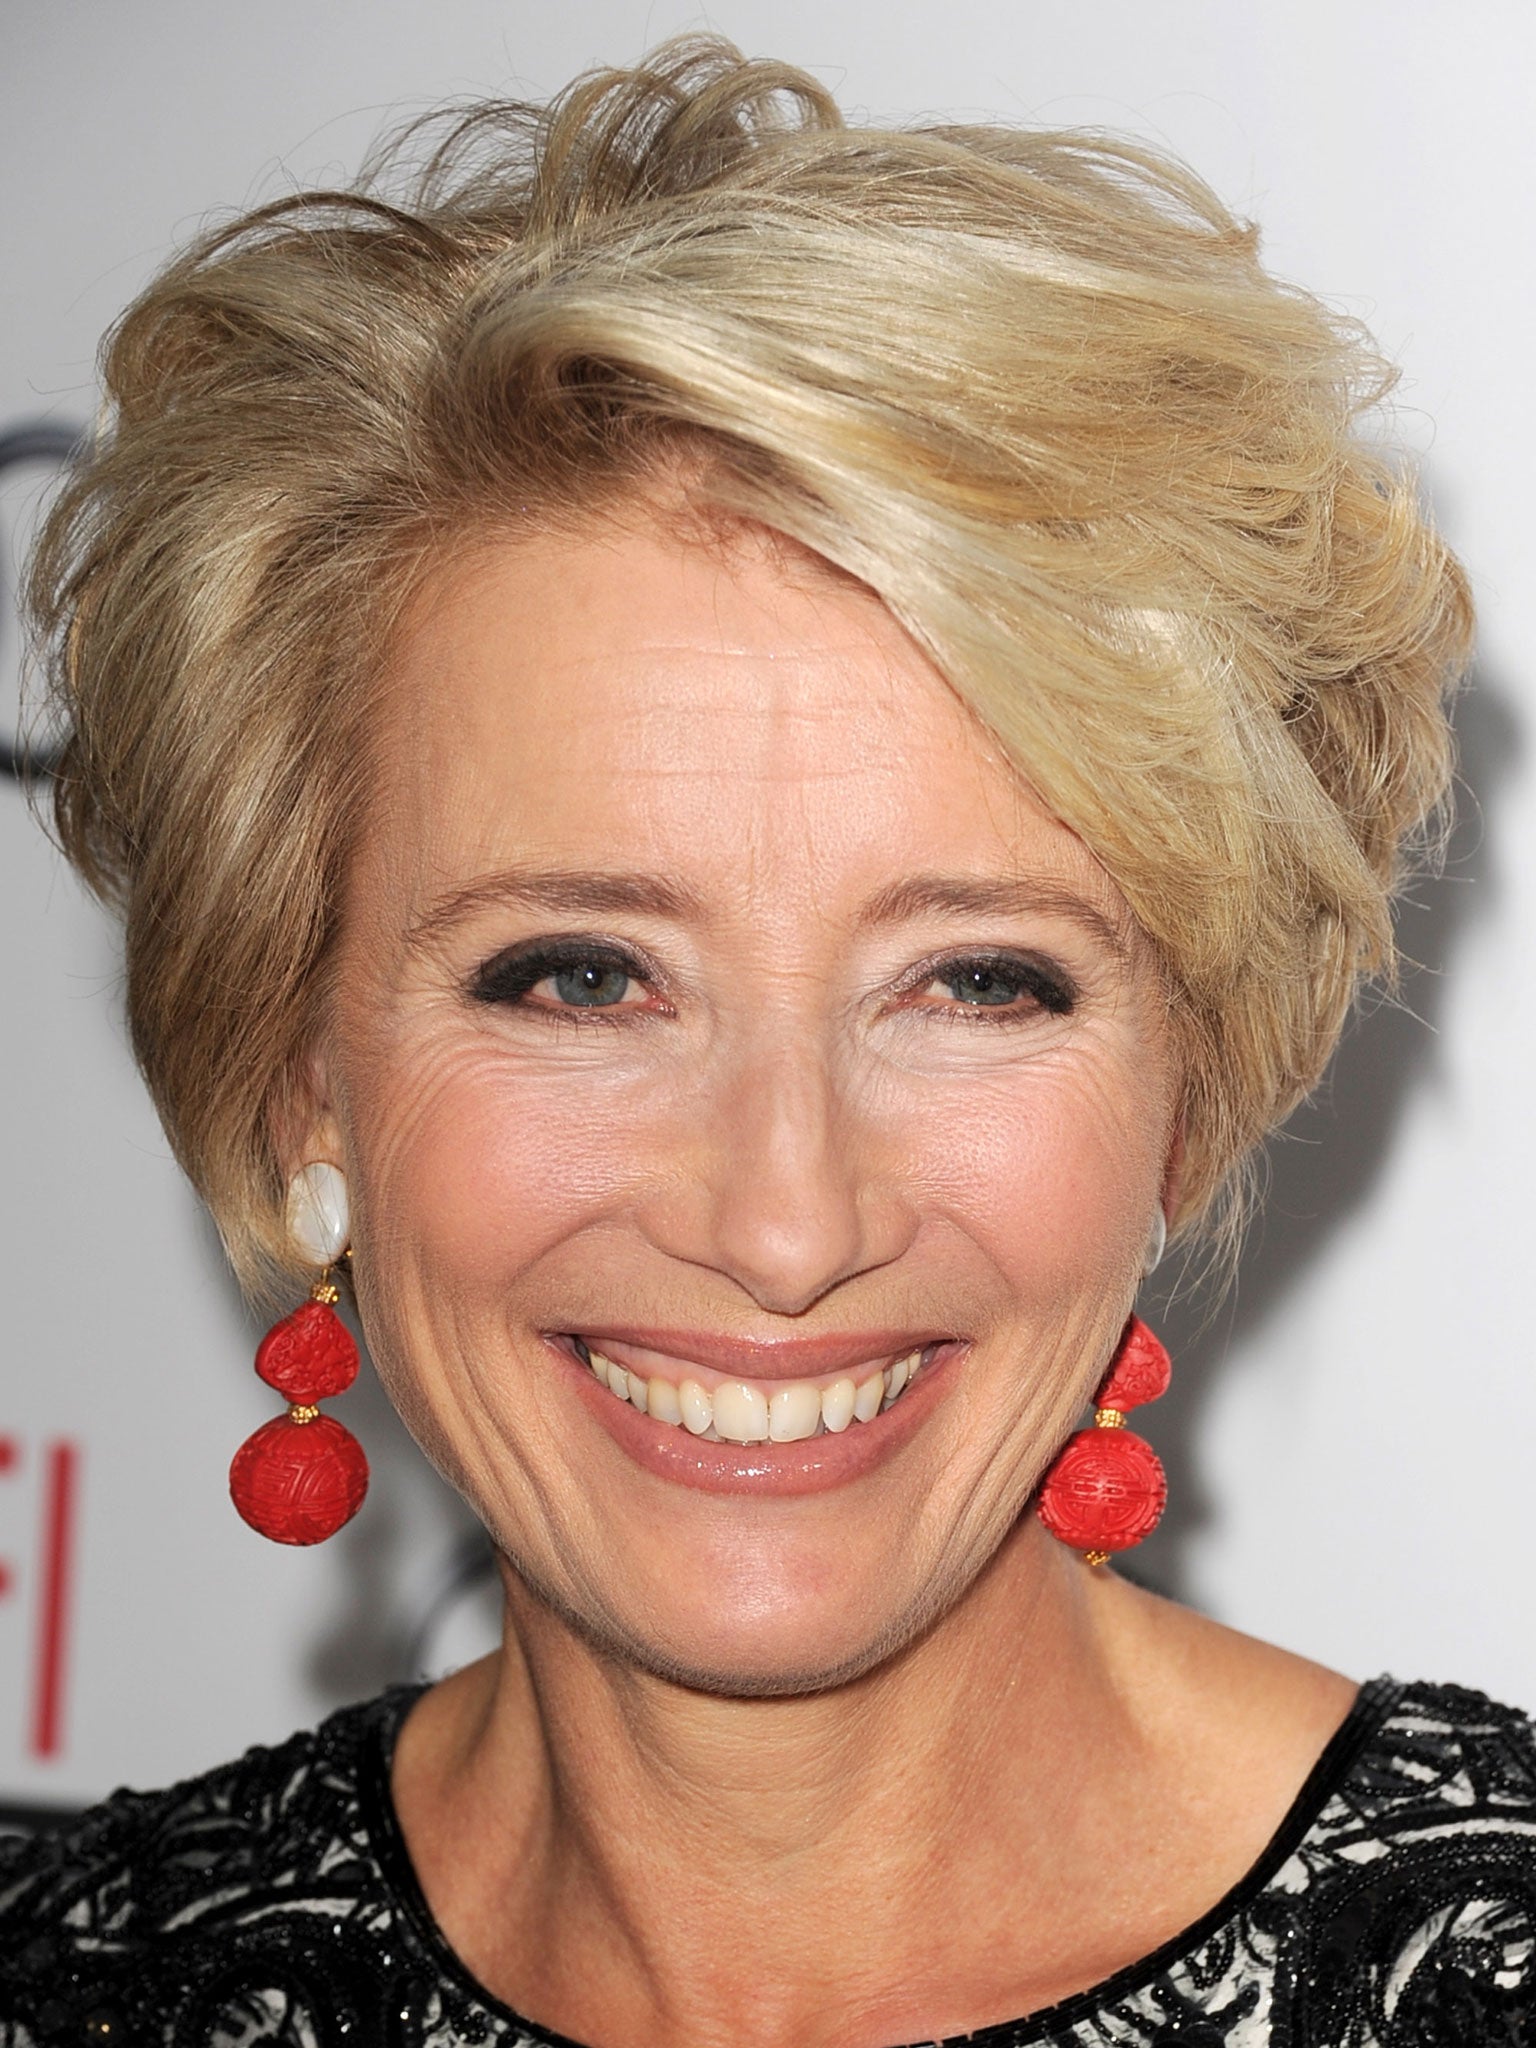 Actress Emma Thompson arrives at the premiere of Walt Disney Pictures' 'Saving Mr. Banks' during AFI FEST 2013